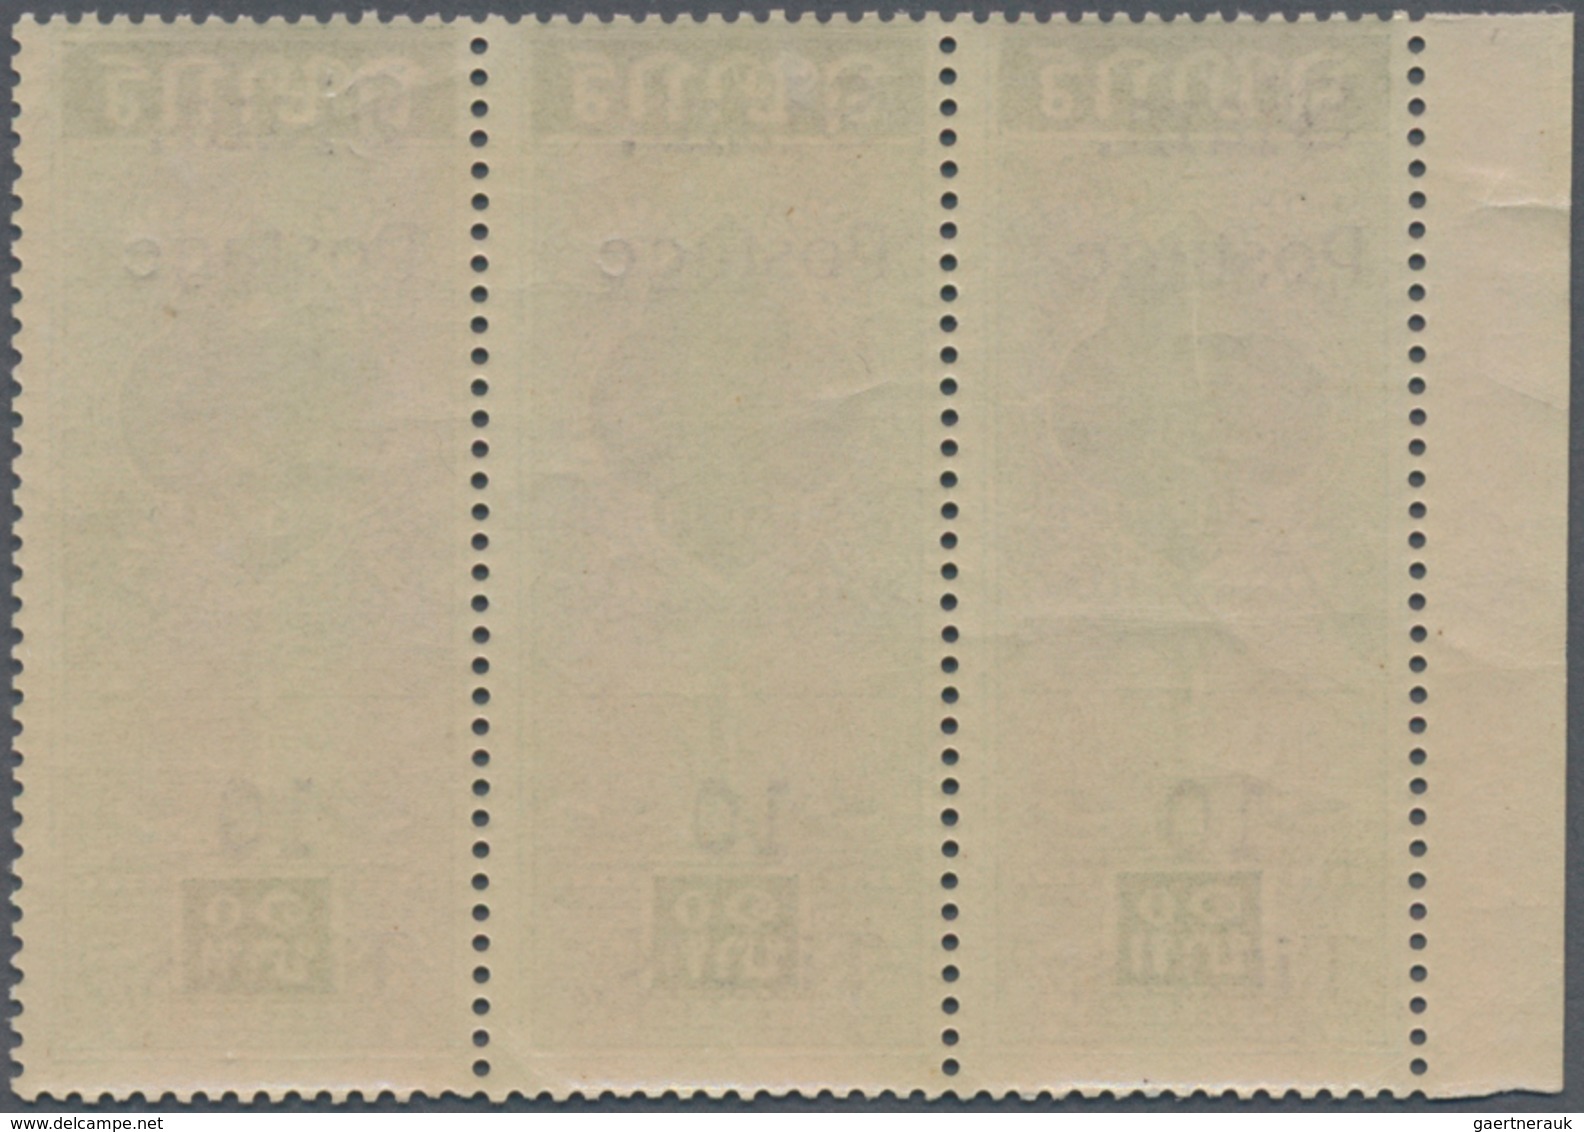 Thailand: 1907, 10 T.on Fiscal, A Left Margin Horizontal Strip Of Three, Pos. 3 First Mount In Margi - Thailand